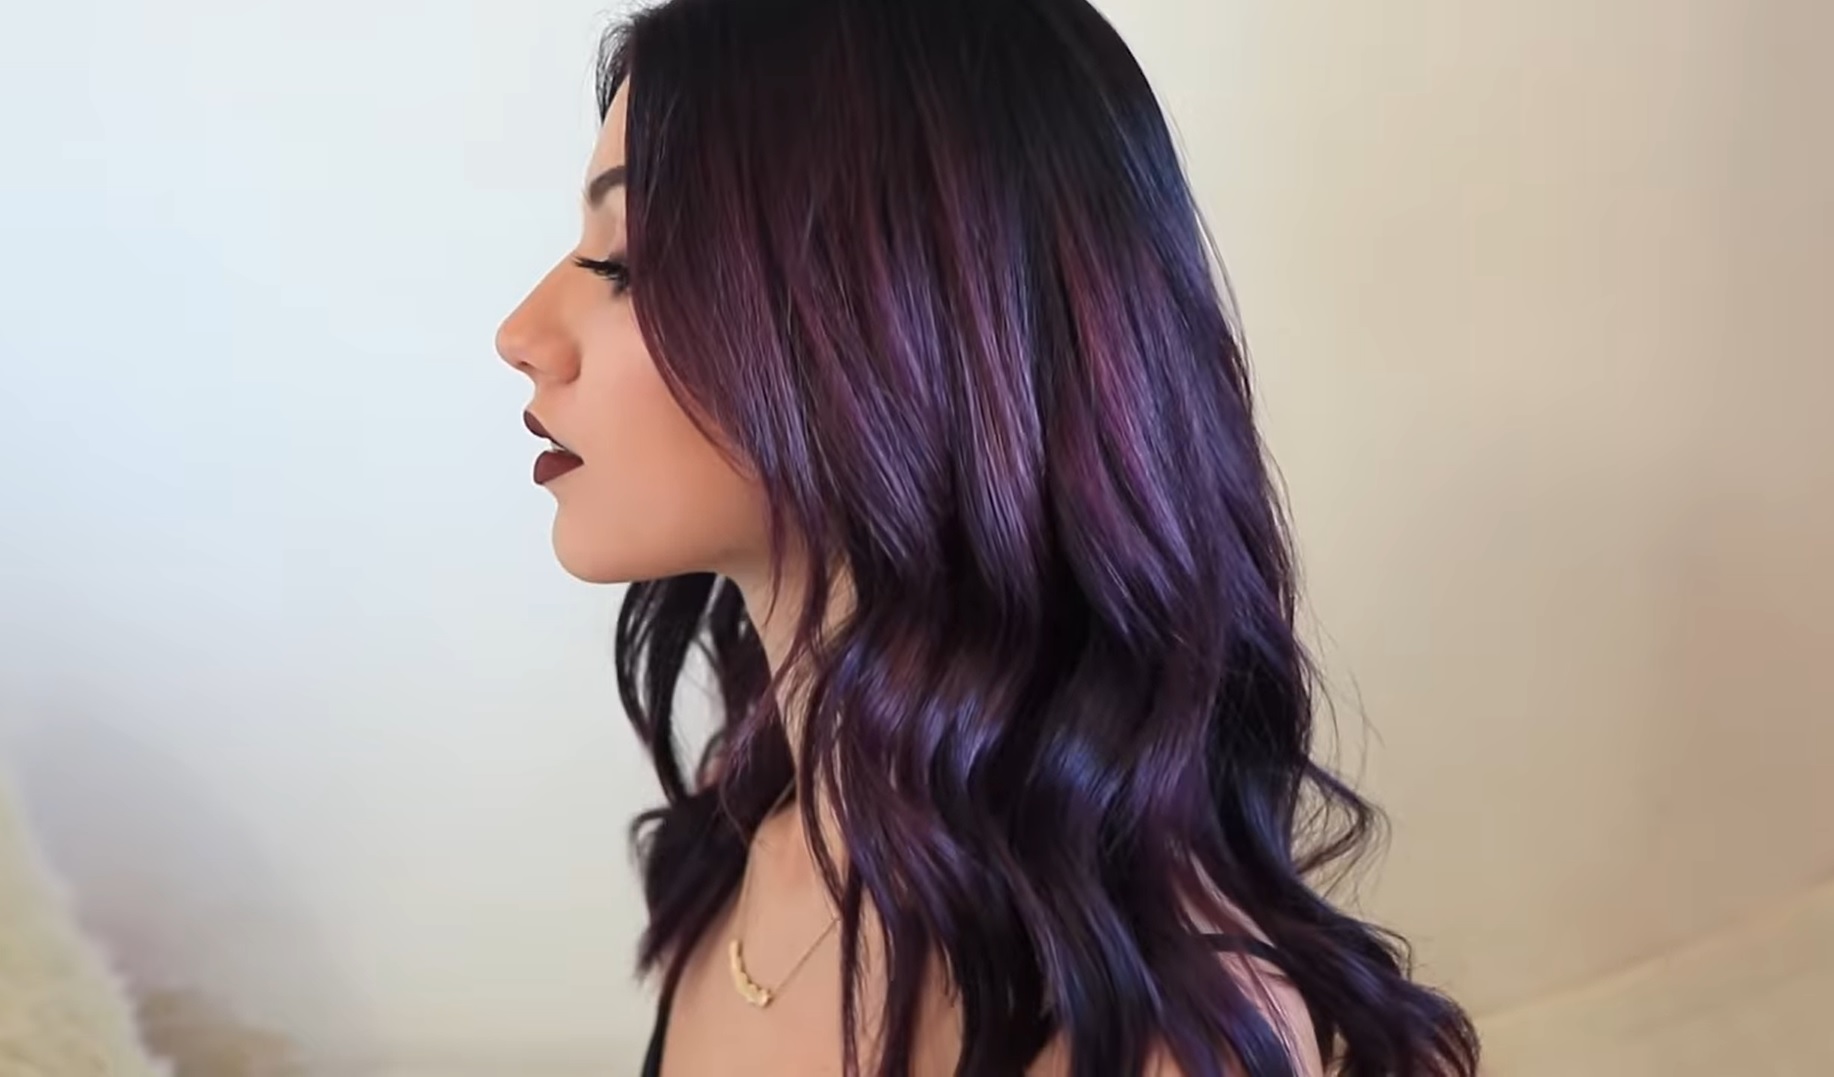 10 Best Purple Hair Dyes 2022 for Lasting Shine.